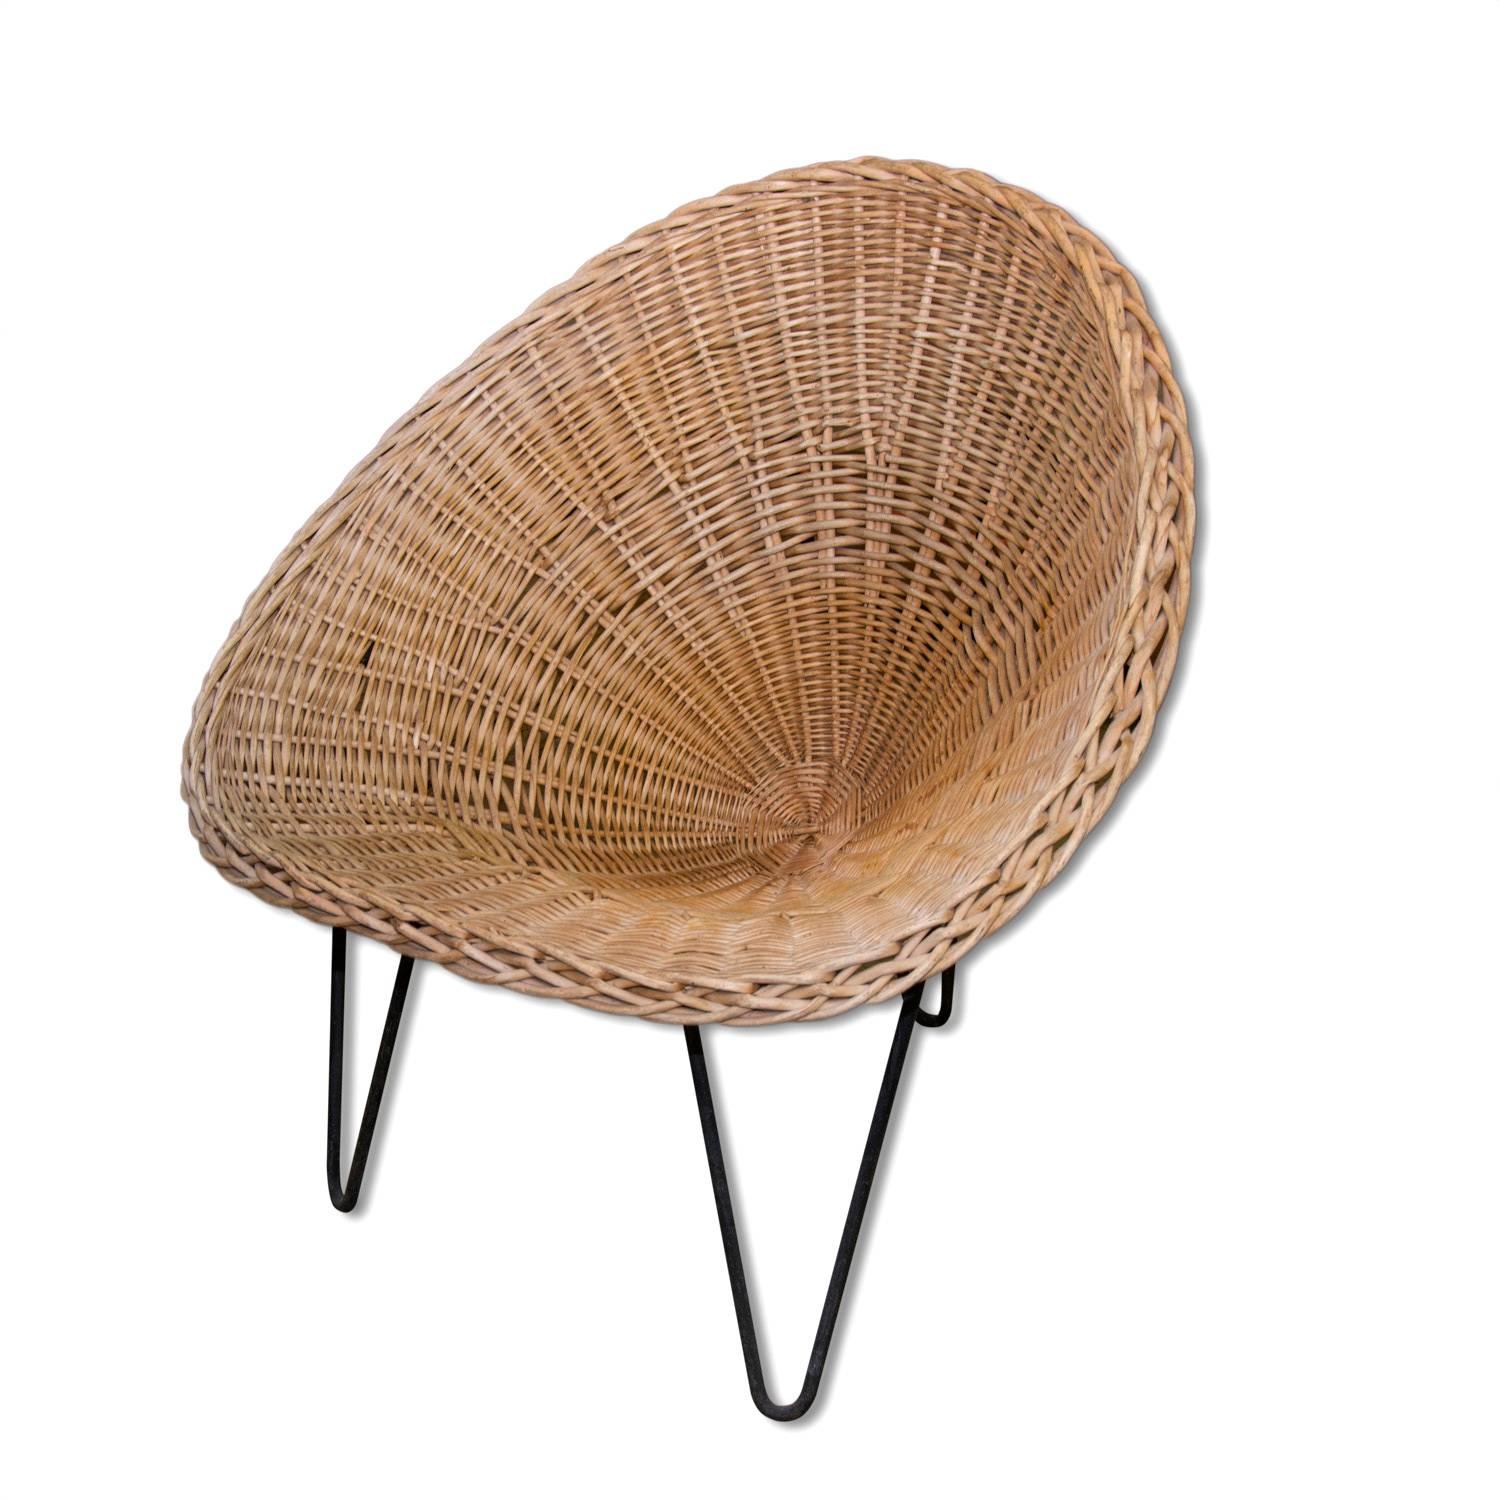 20th Century Wicker and Iron Lounge Chair, France, Midcentury, 1950s